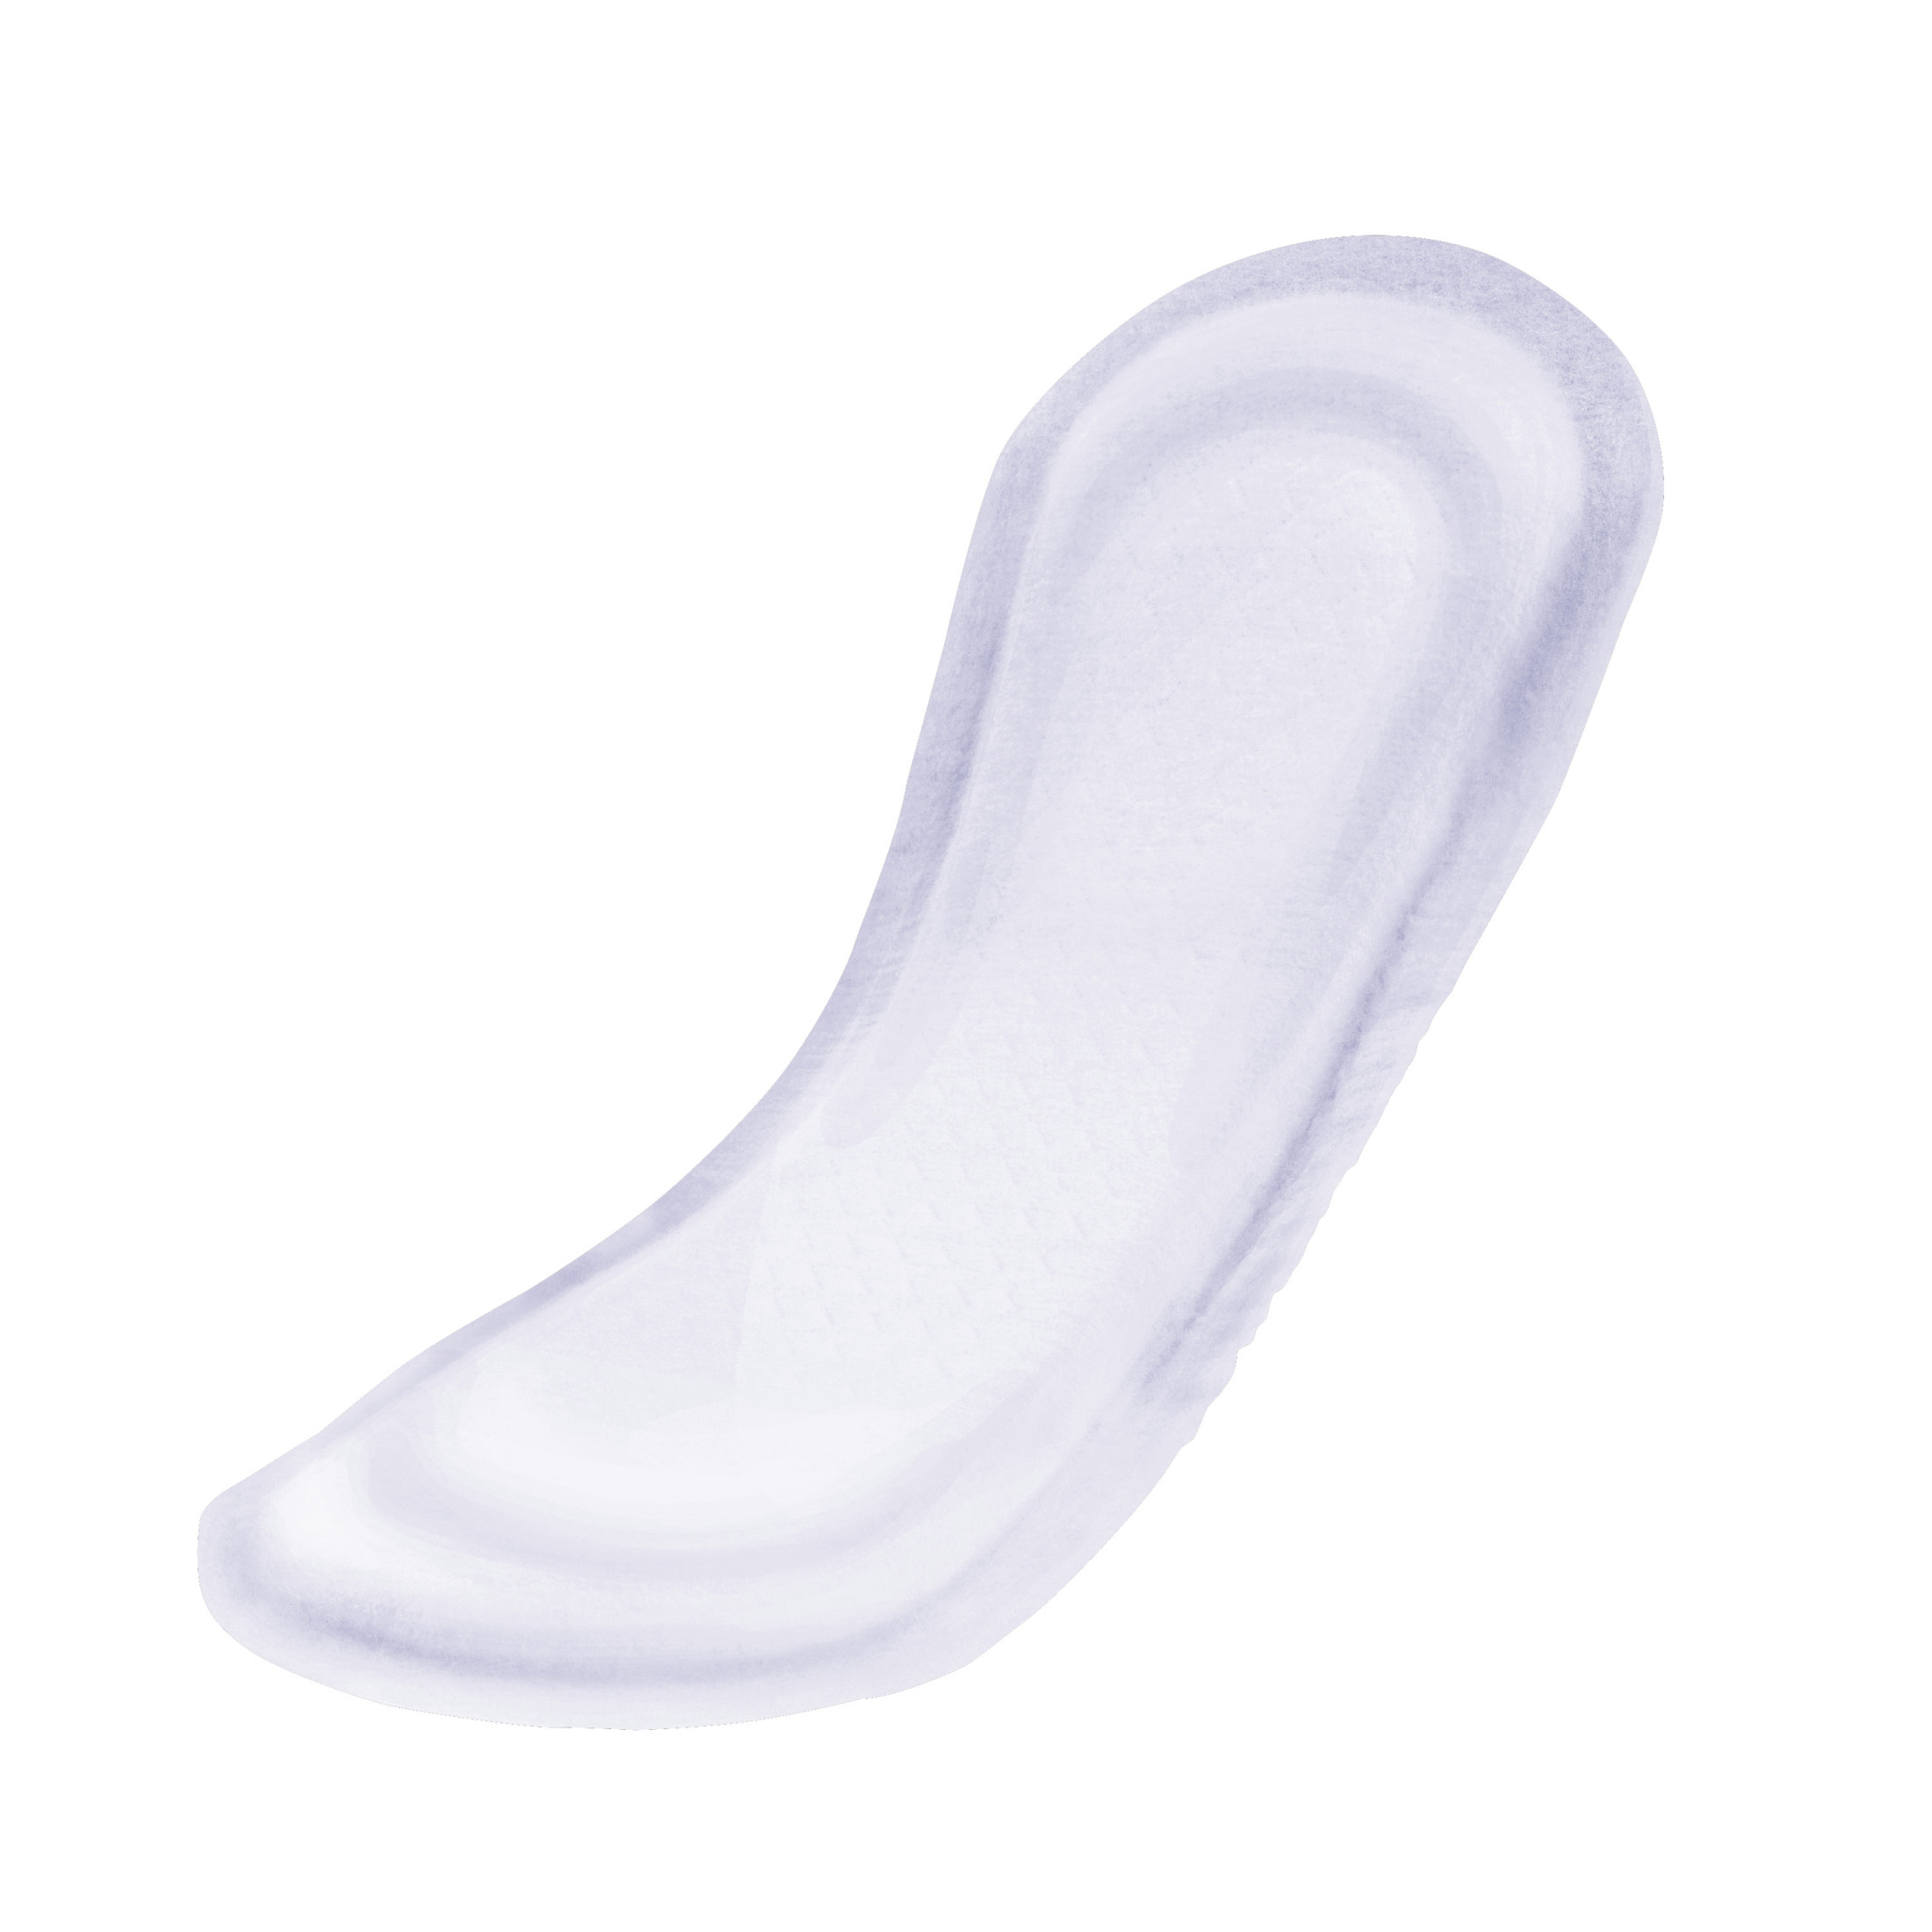 Tena Sensitive Care Extra Coverage Moderate Absorbency Incontinence Pad, 60ct - image 3 of 7